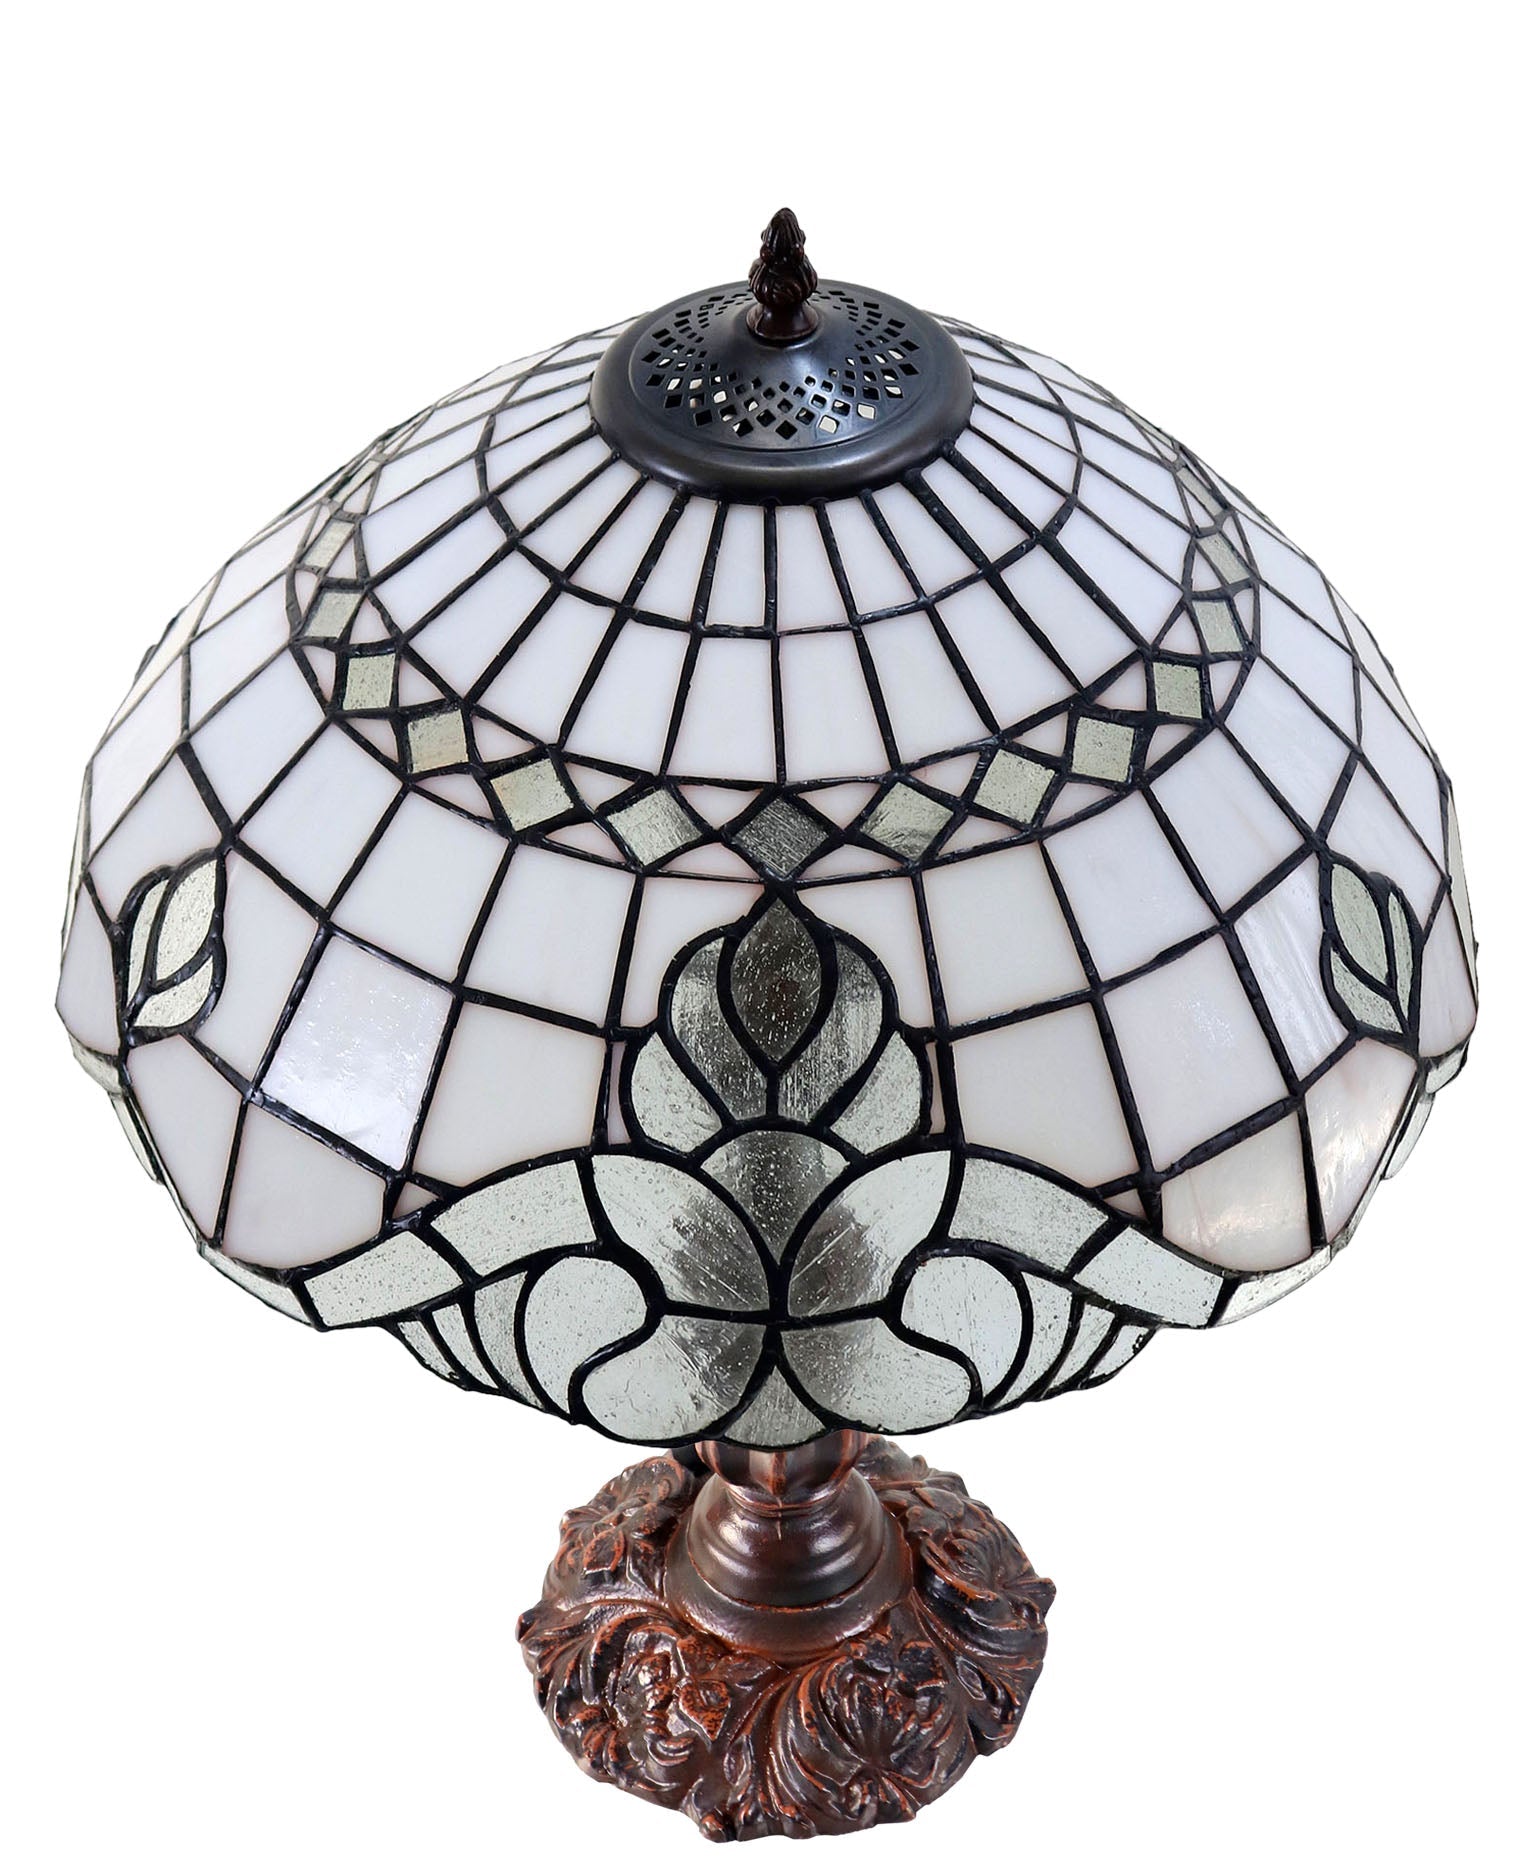 16" Large Vienna Victorian Style Tiffany Table Lamp